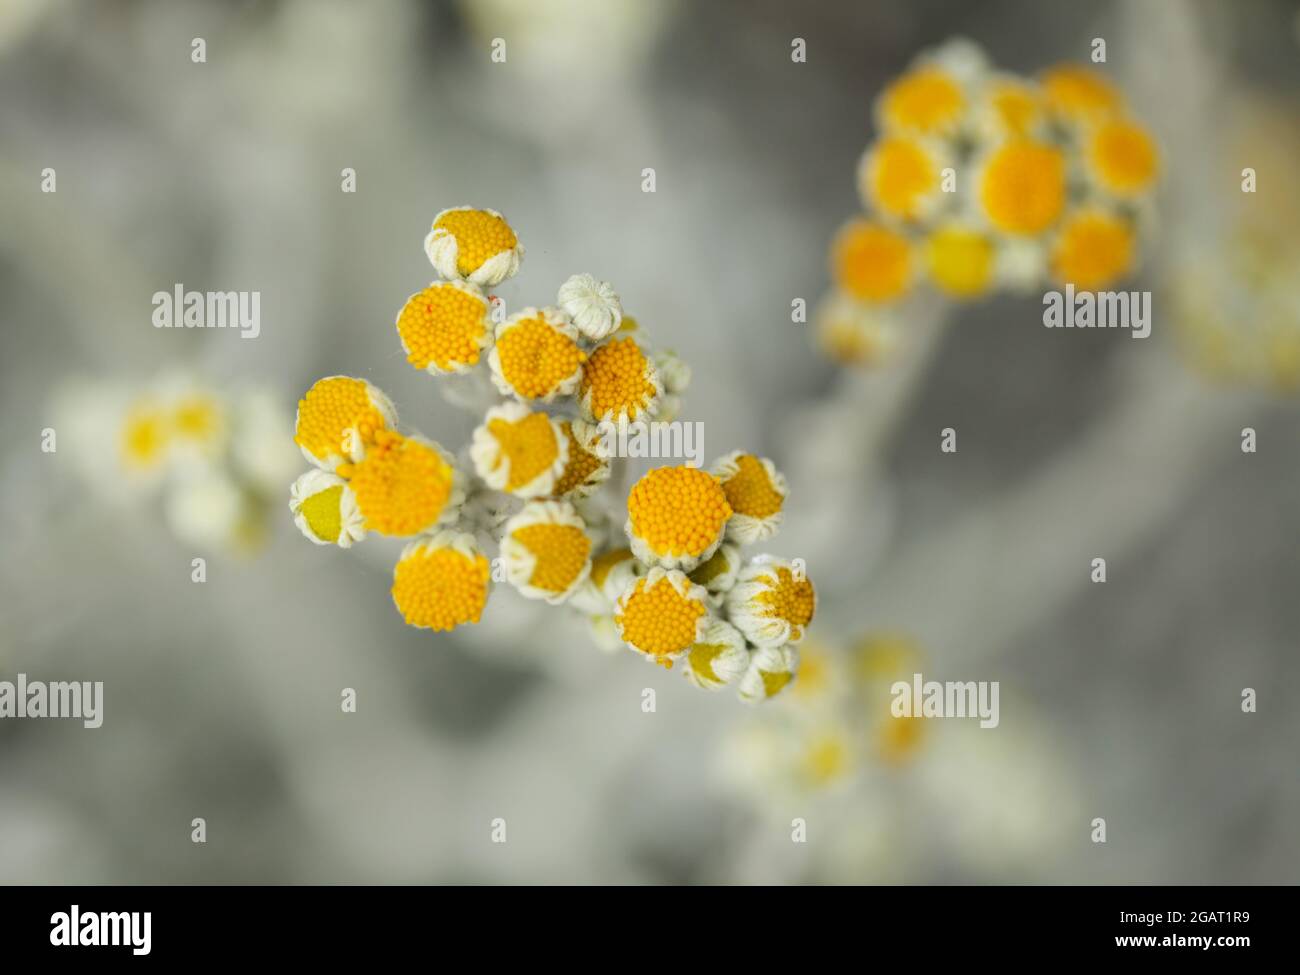 natural macro floral background with silver leaves of Jacobaea maritima, commonly known as silver ragwort Stock Photo